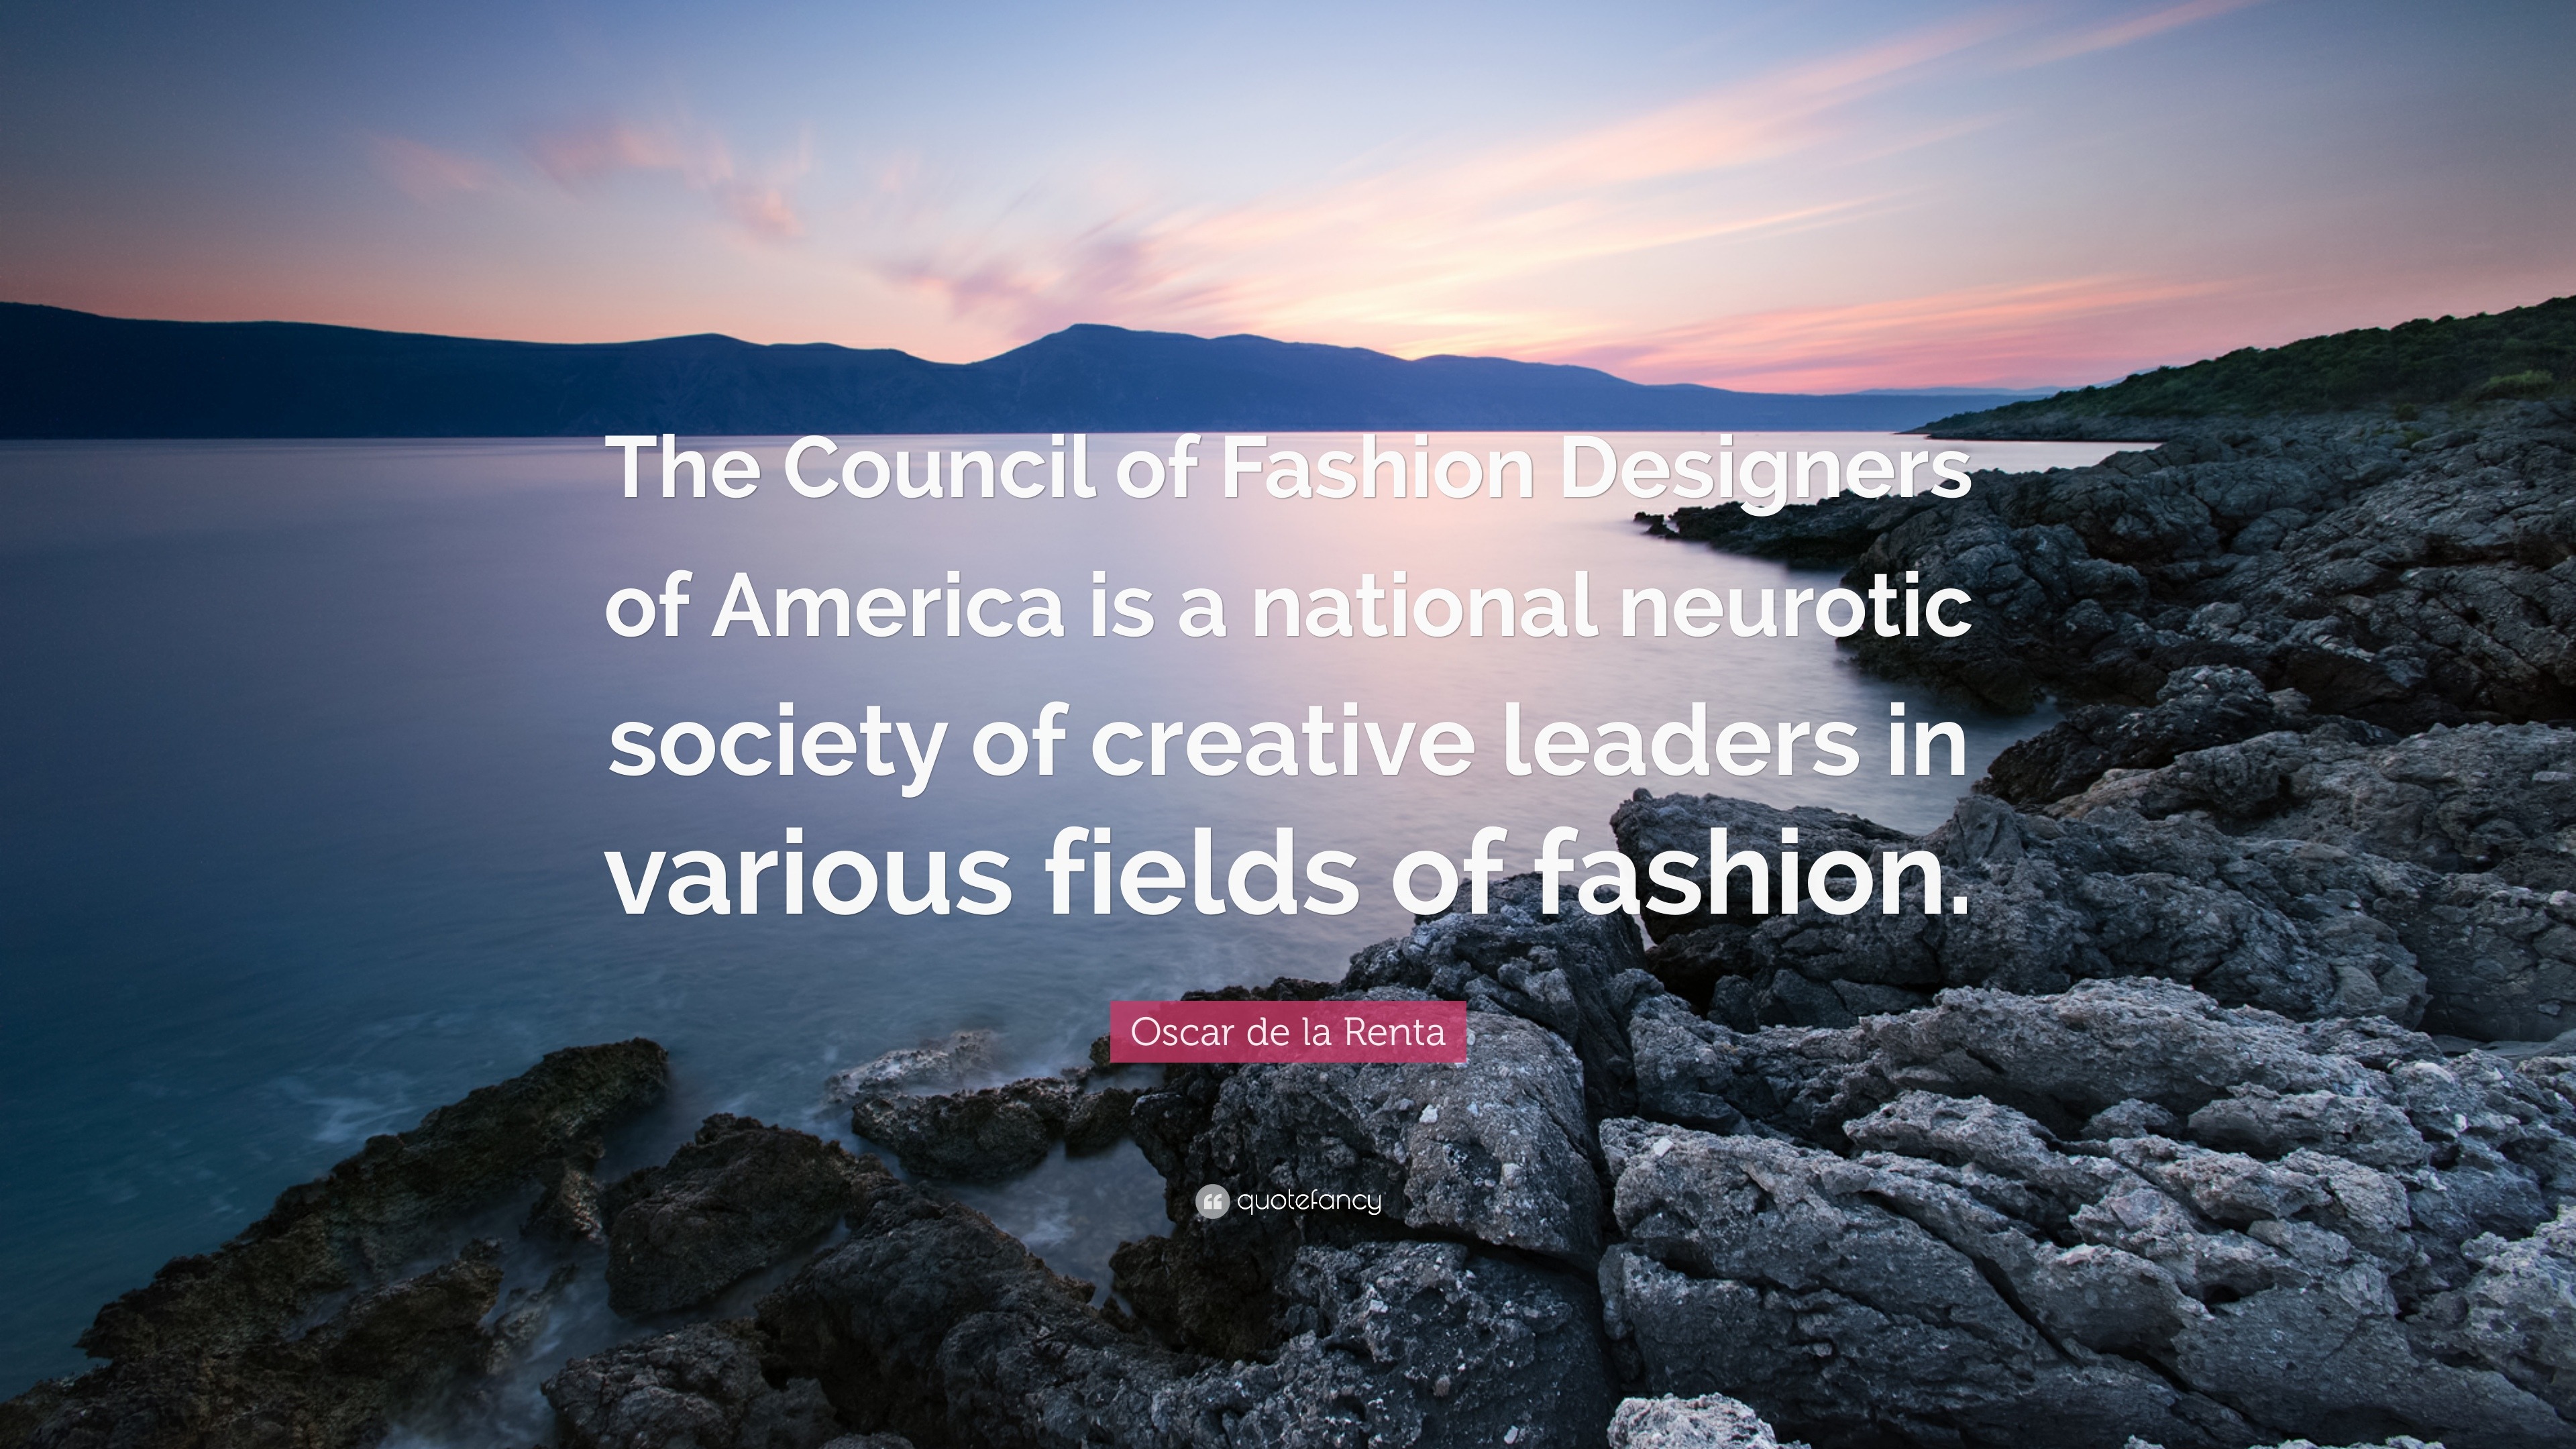 Council of Fashion Designers of America